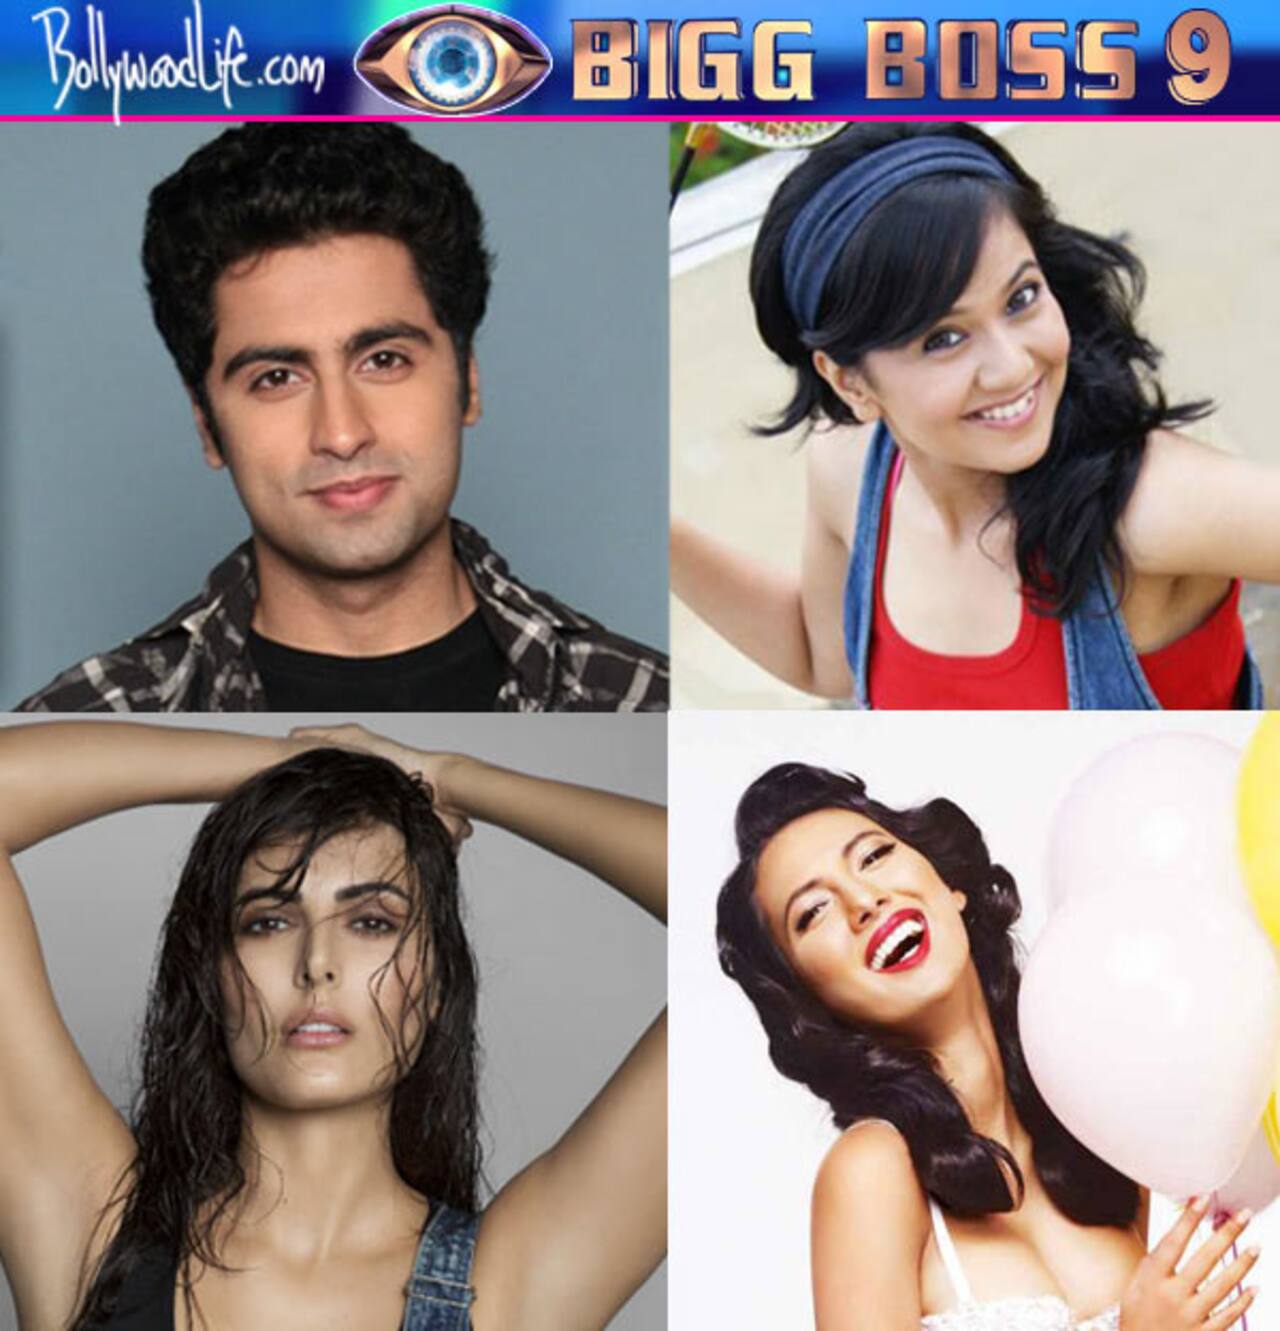 Bigg Boss 9 contestant list: All you need to know about Roopal Tyagi, Aman Varma, Ankit Gera!